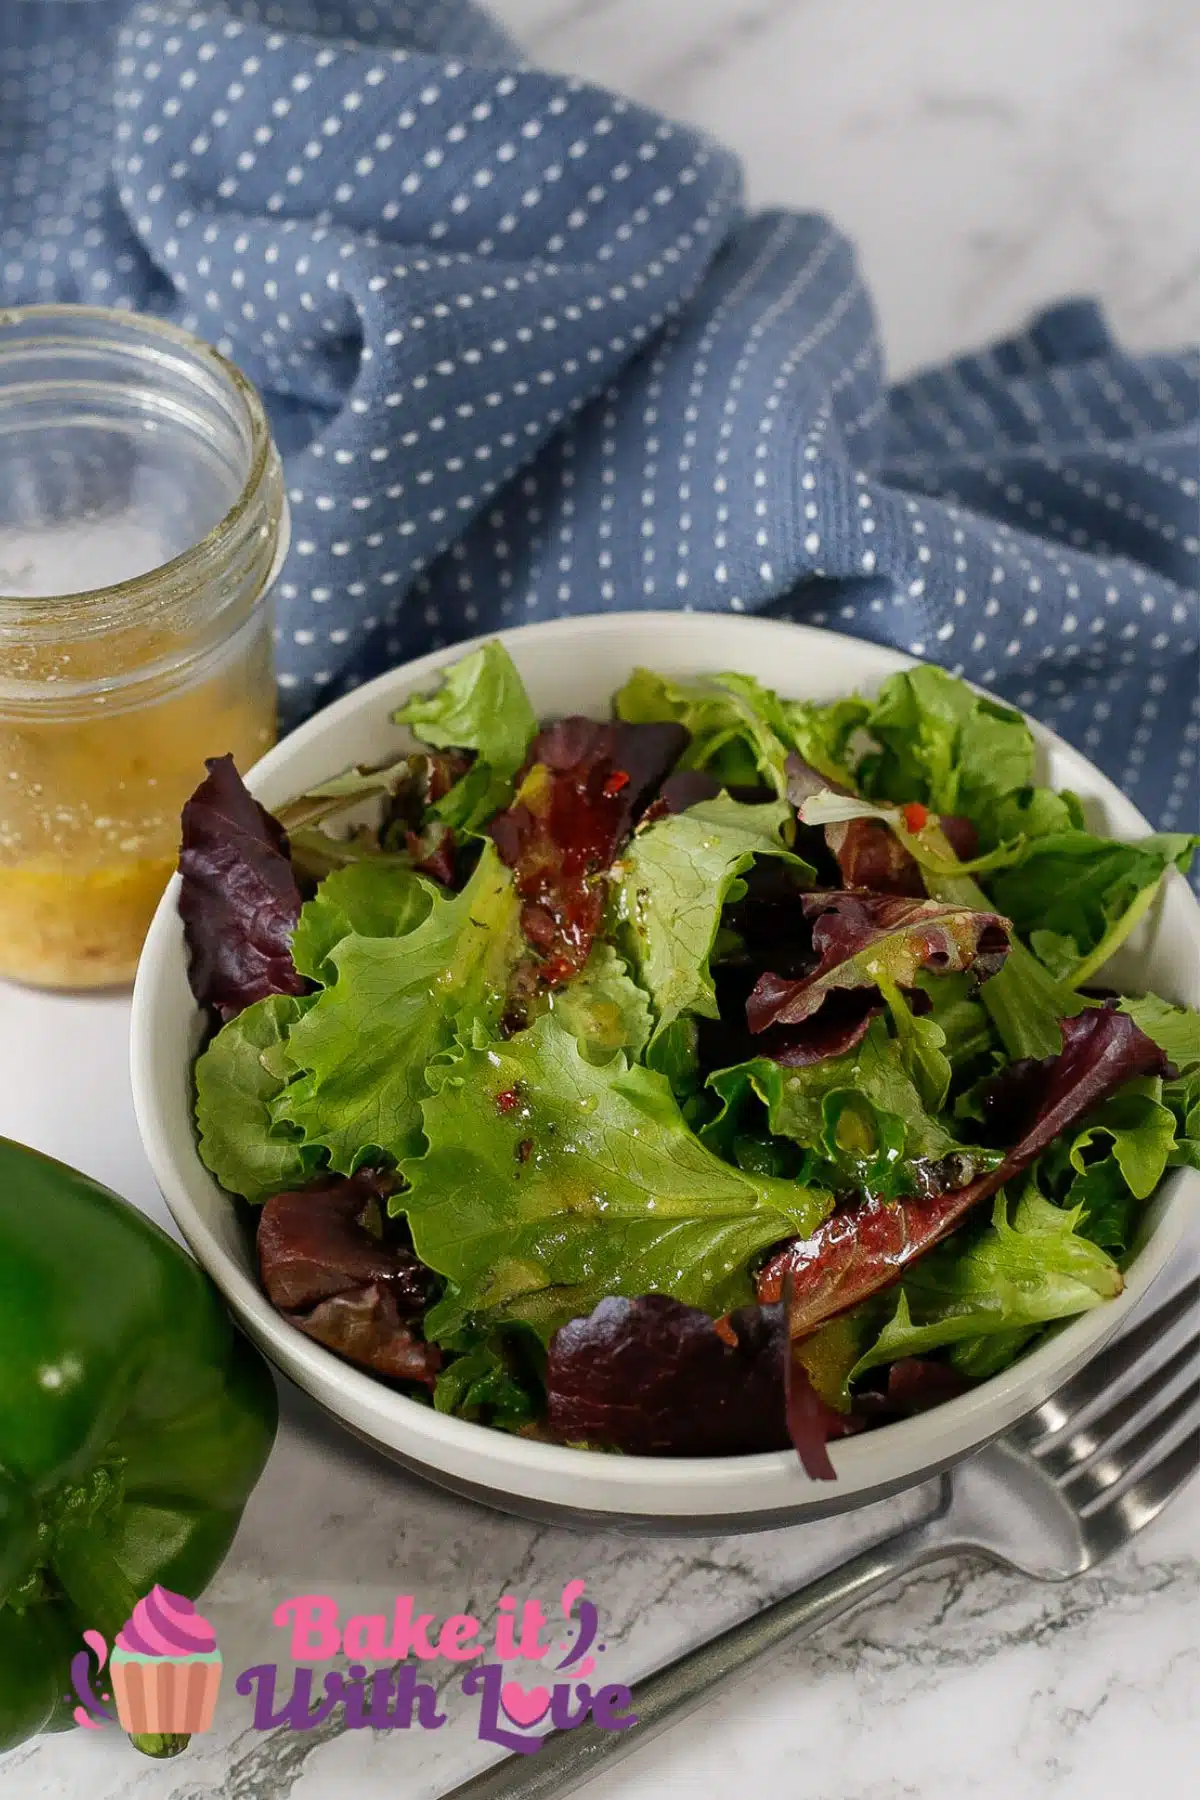 Homemade Italian dressing recipe served with greens and the jar of salad dressing in the background.